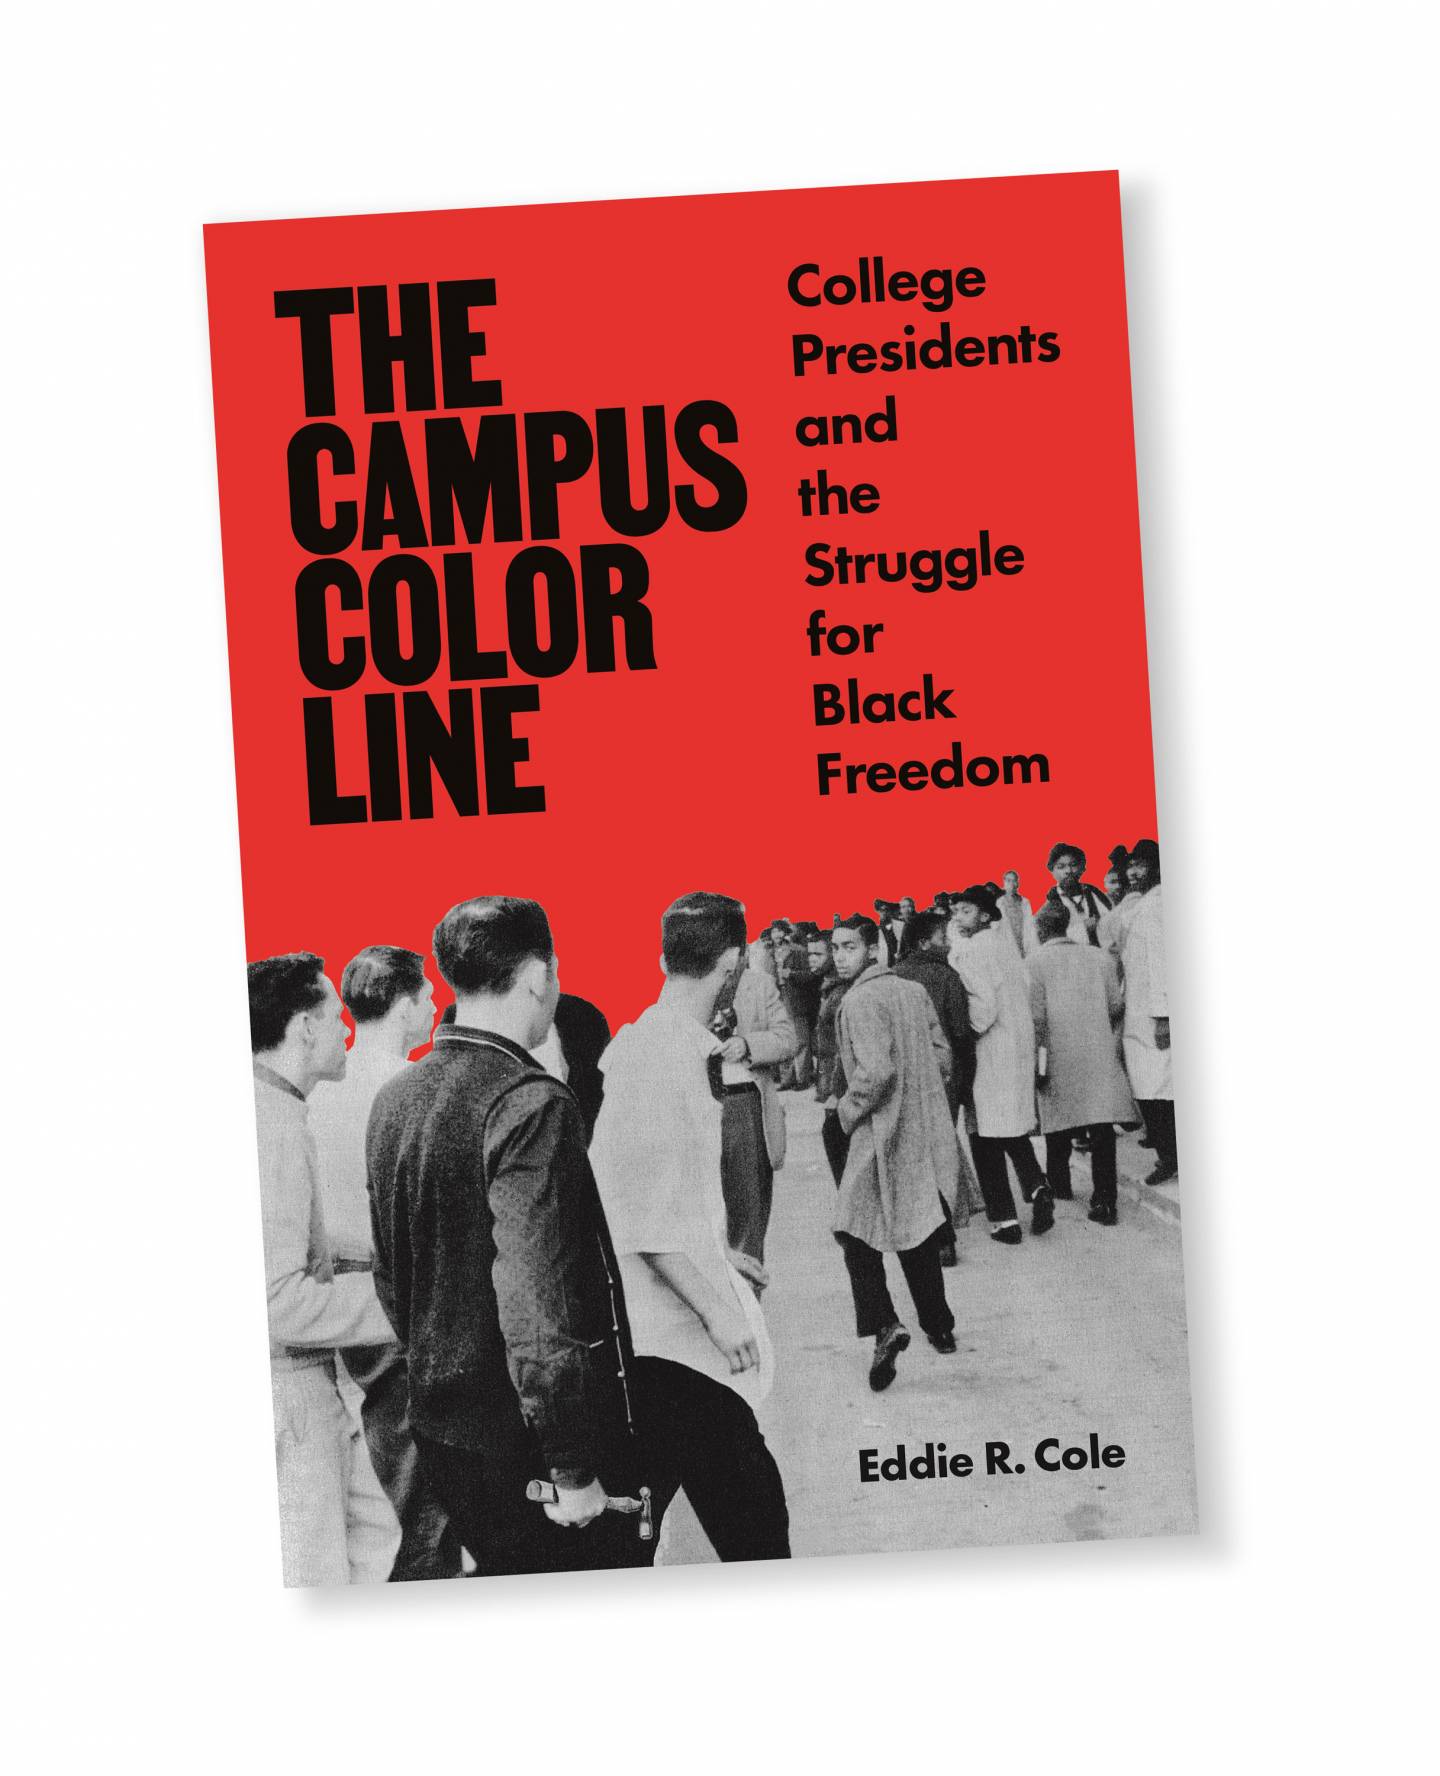 Book cover of “The Campus Color Line: College Presidents and the Struggle for Black Freedom” by Eddie R. Cole; image of a group of white men, one of which holds a hammer, following and menacing a group of black men